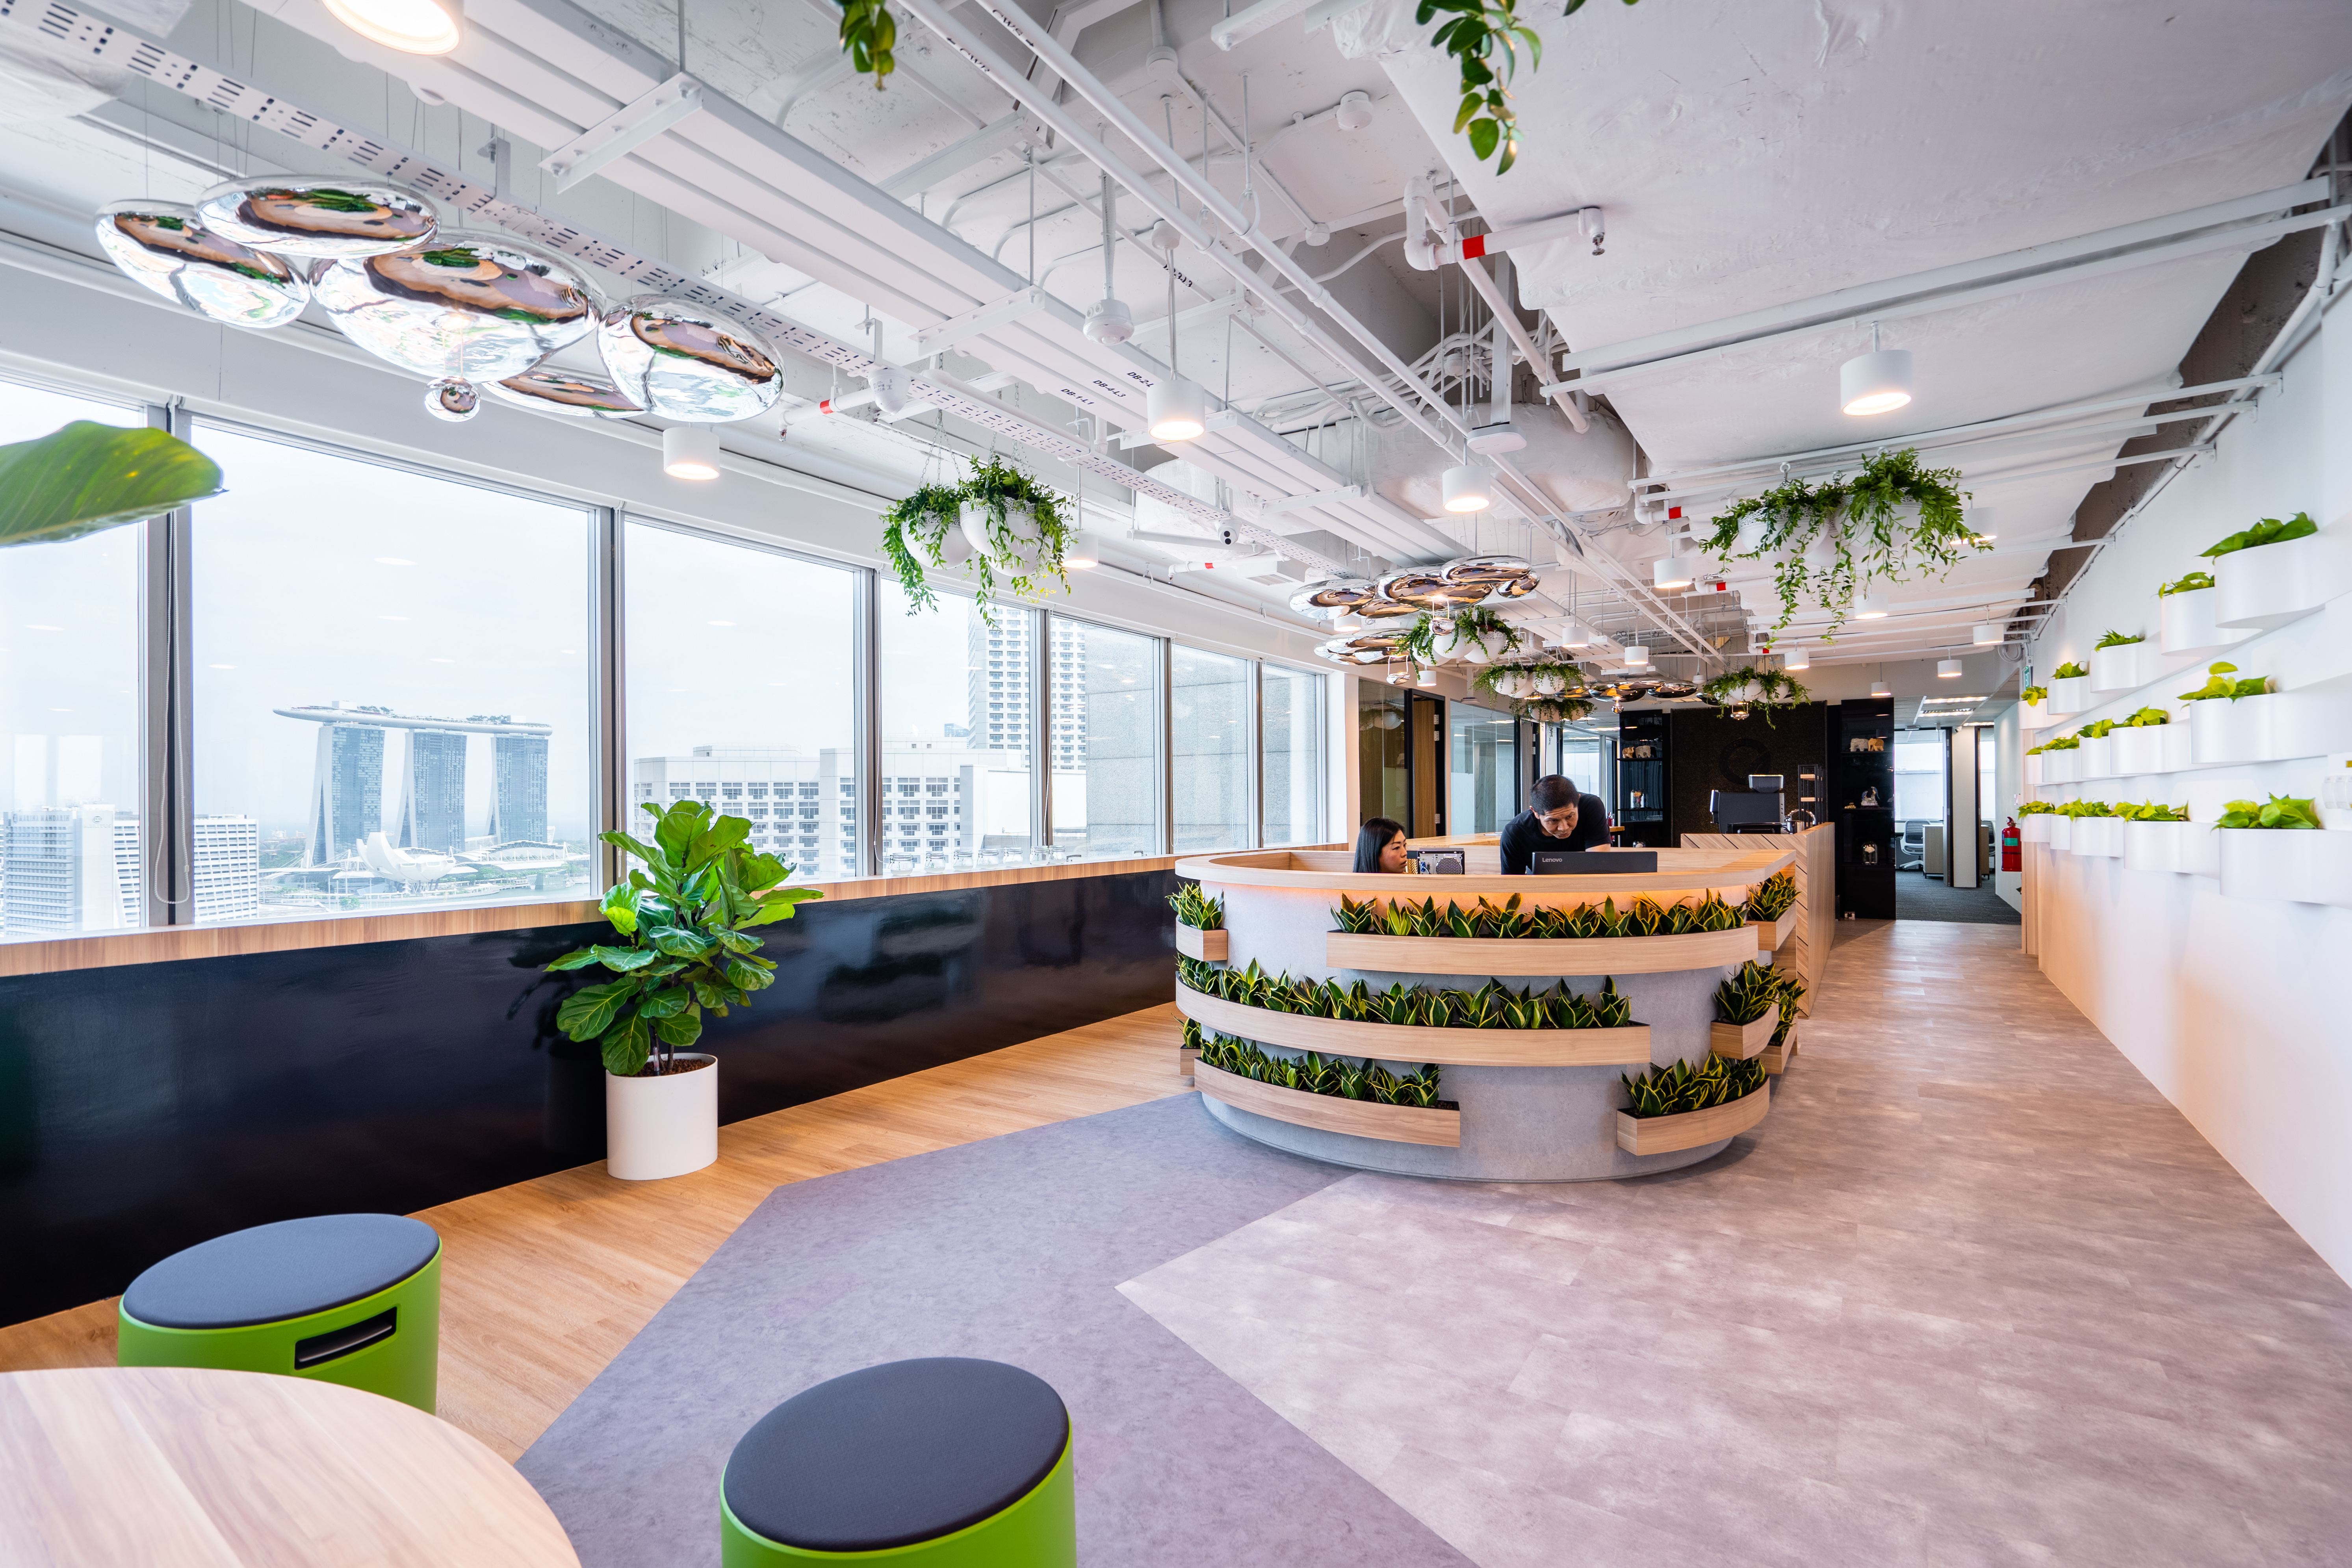 Starting your own business? Stay ahead of your competition with O2Work, the best eco-friendly co-working space in Singapore!